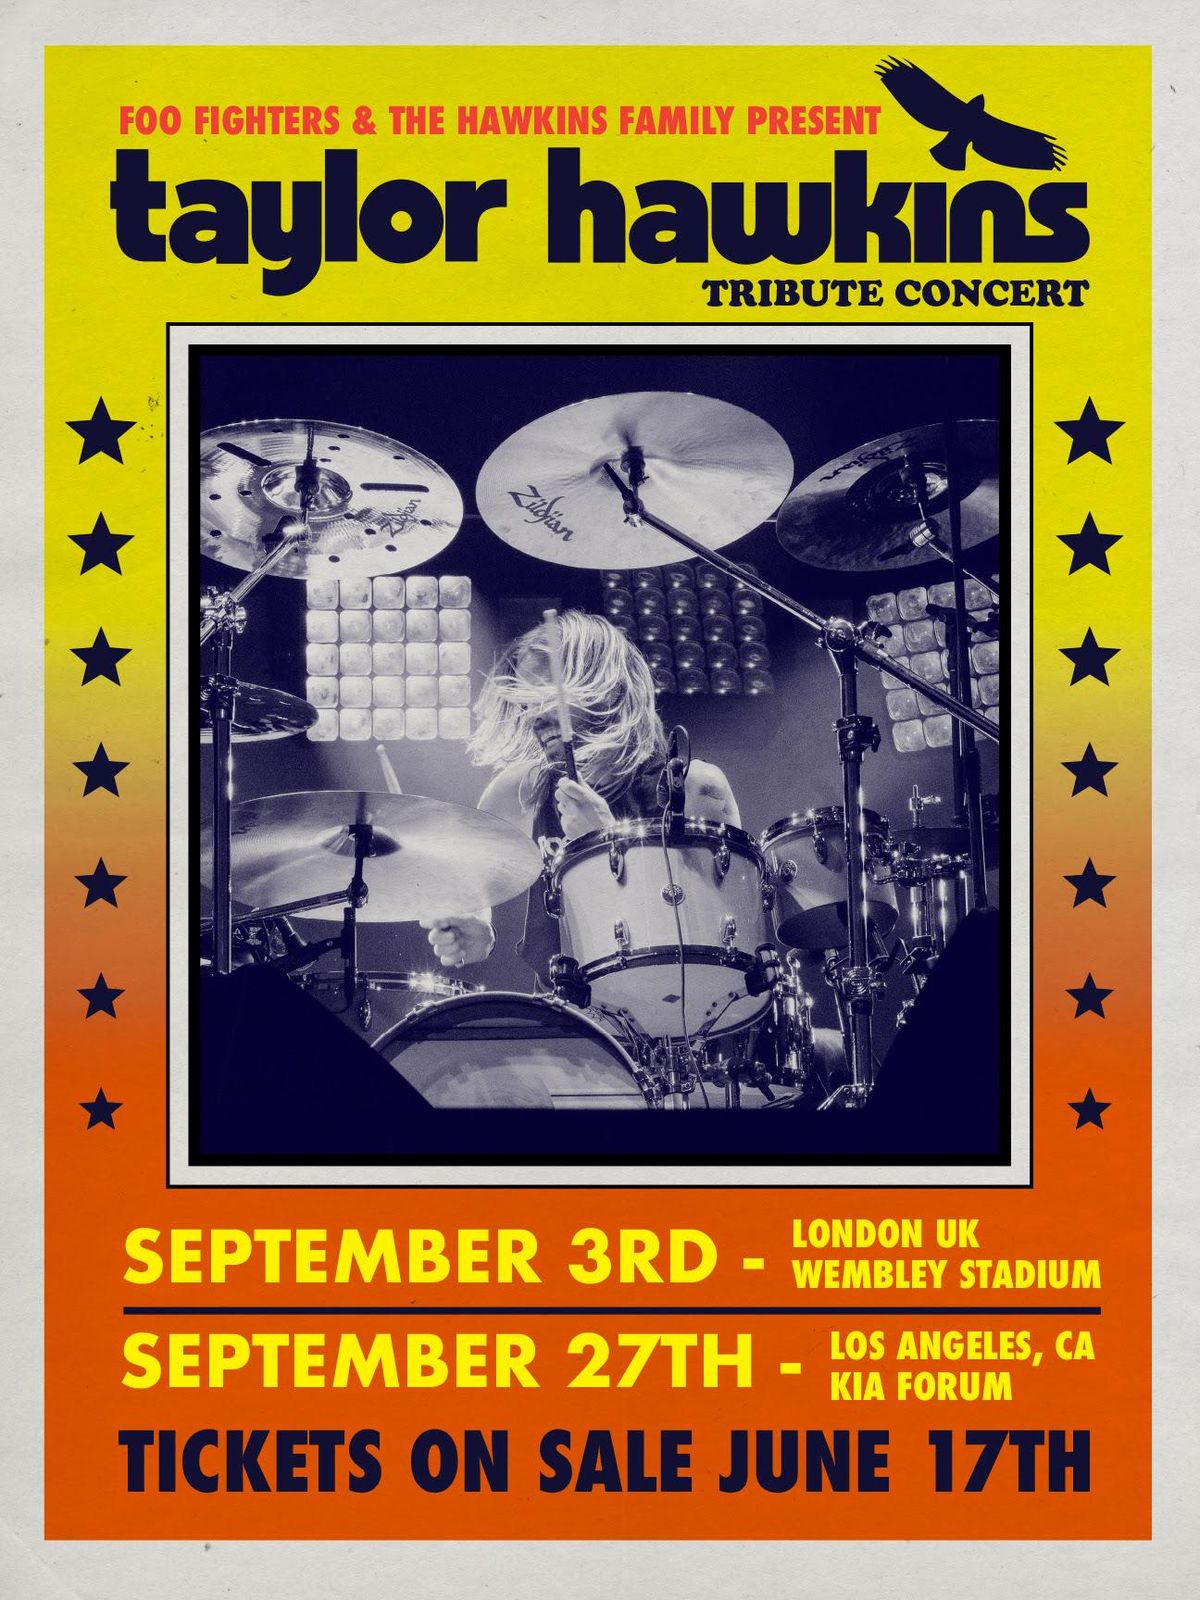 Foo Fighters & the Hawkins Family Announce Taylor Hawkins Tribute Concerts